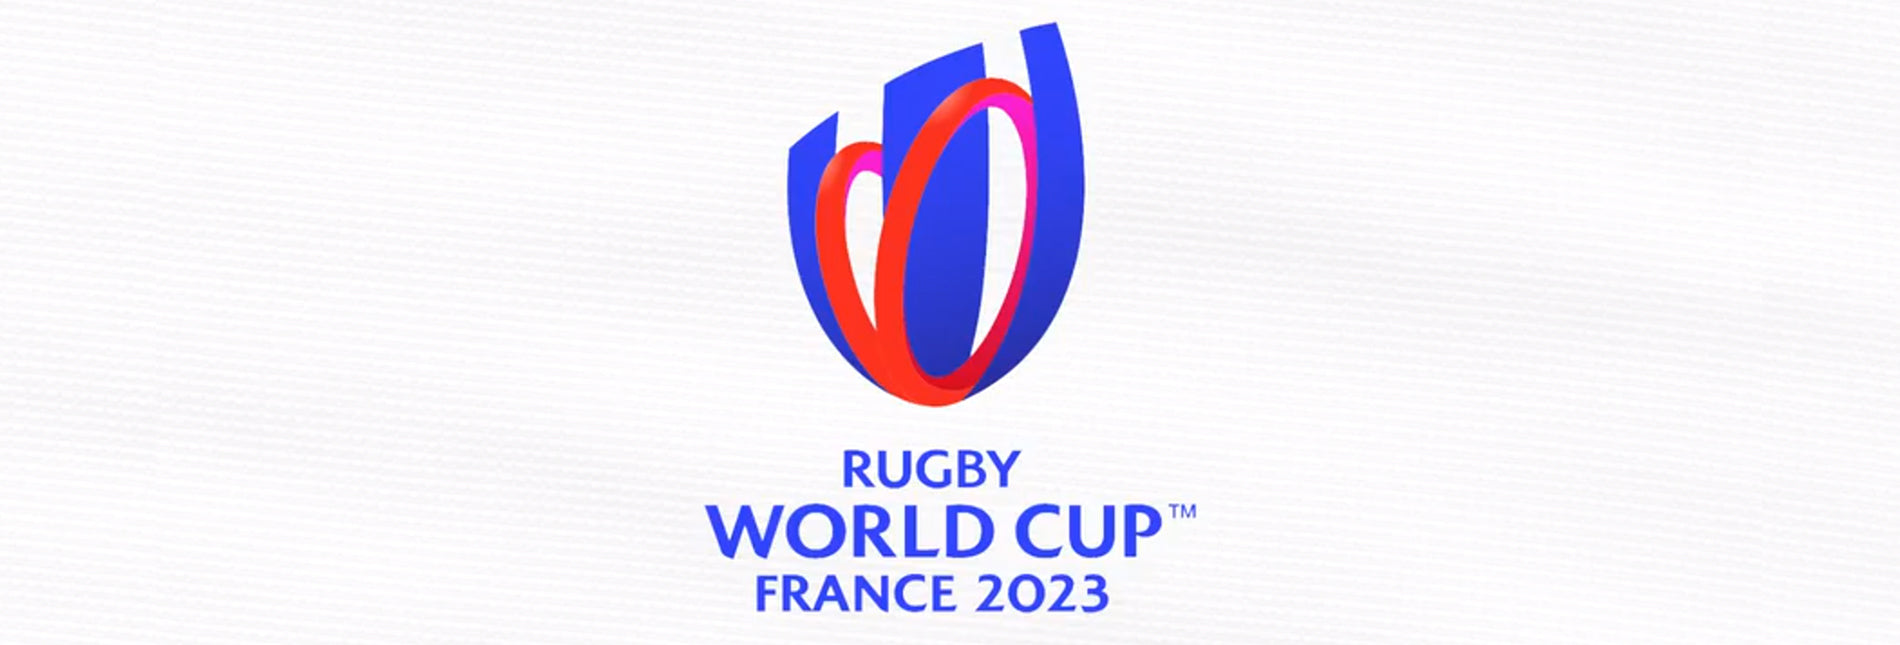 Rugby World Cup lives on. France 2023, see you there!